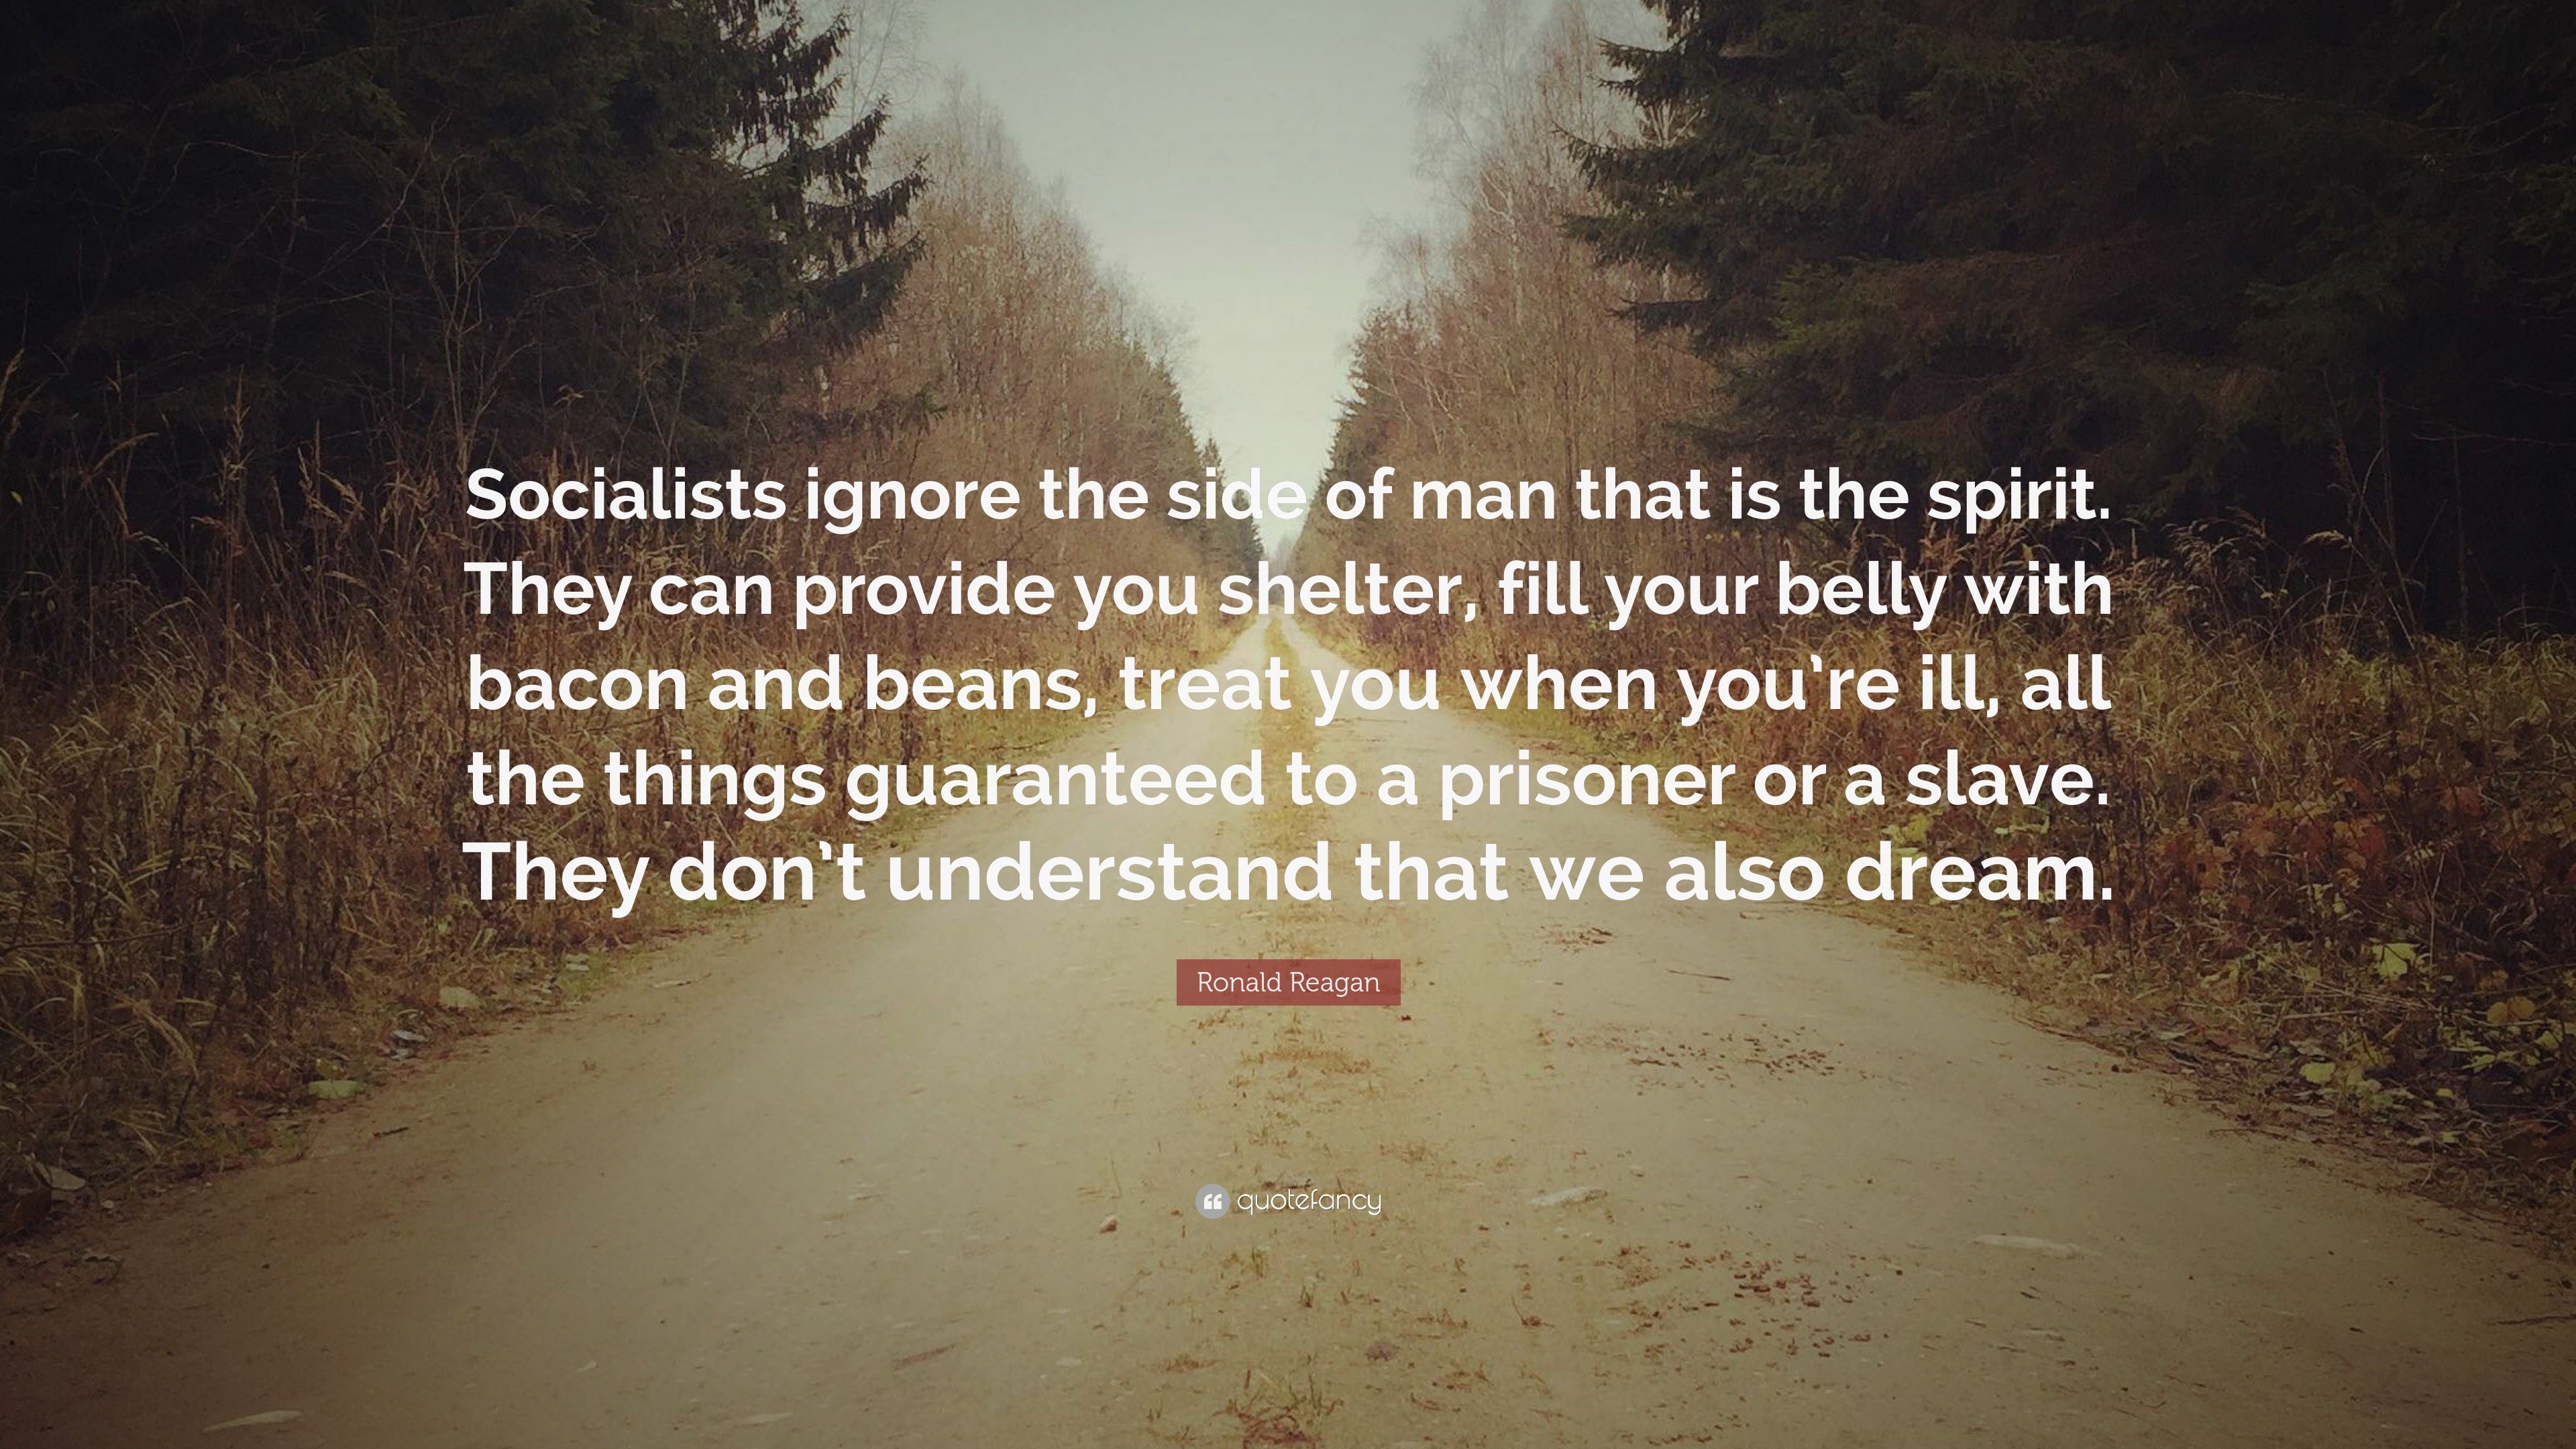 Ronald Reagan Quote: "Socialists ignore the side of man that is the spirit. They can provide you ...